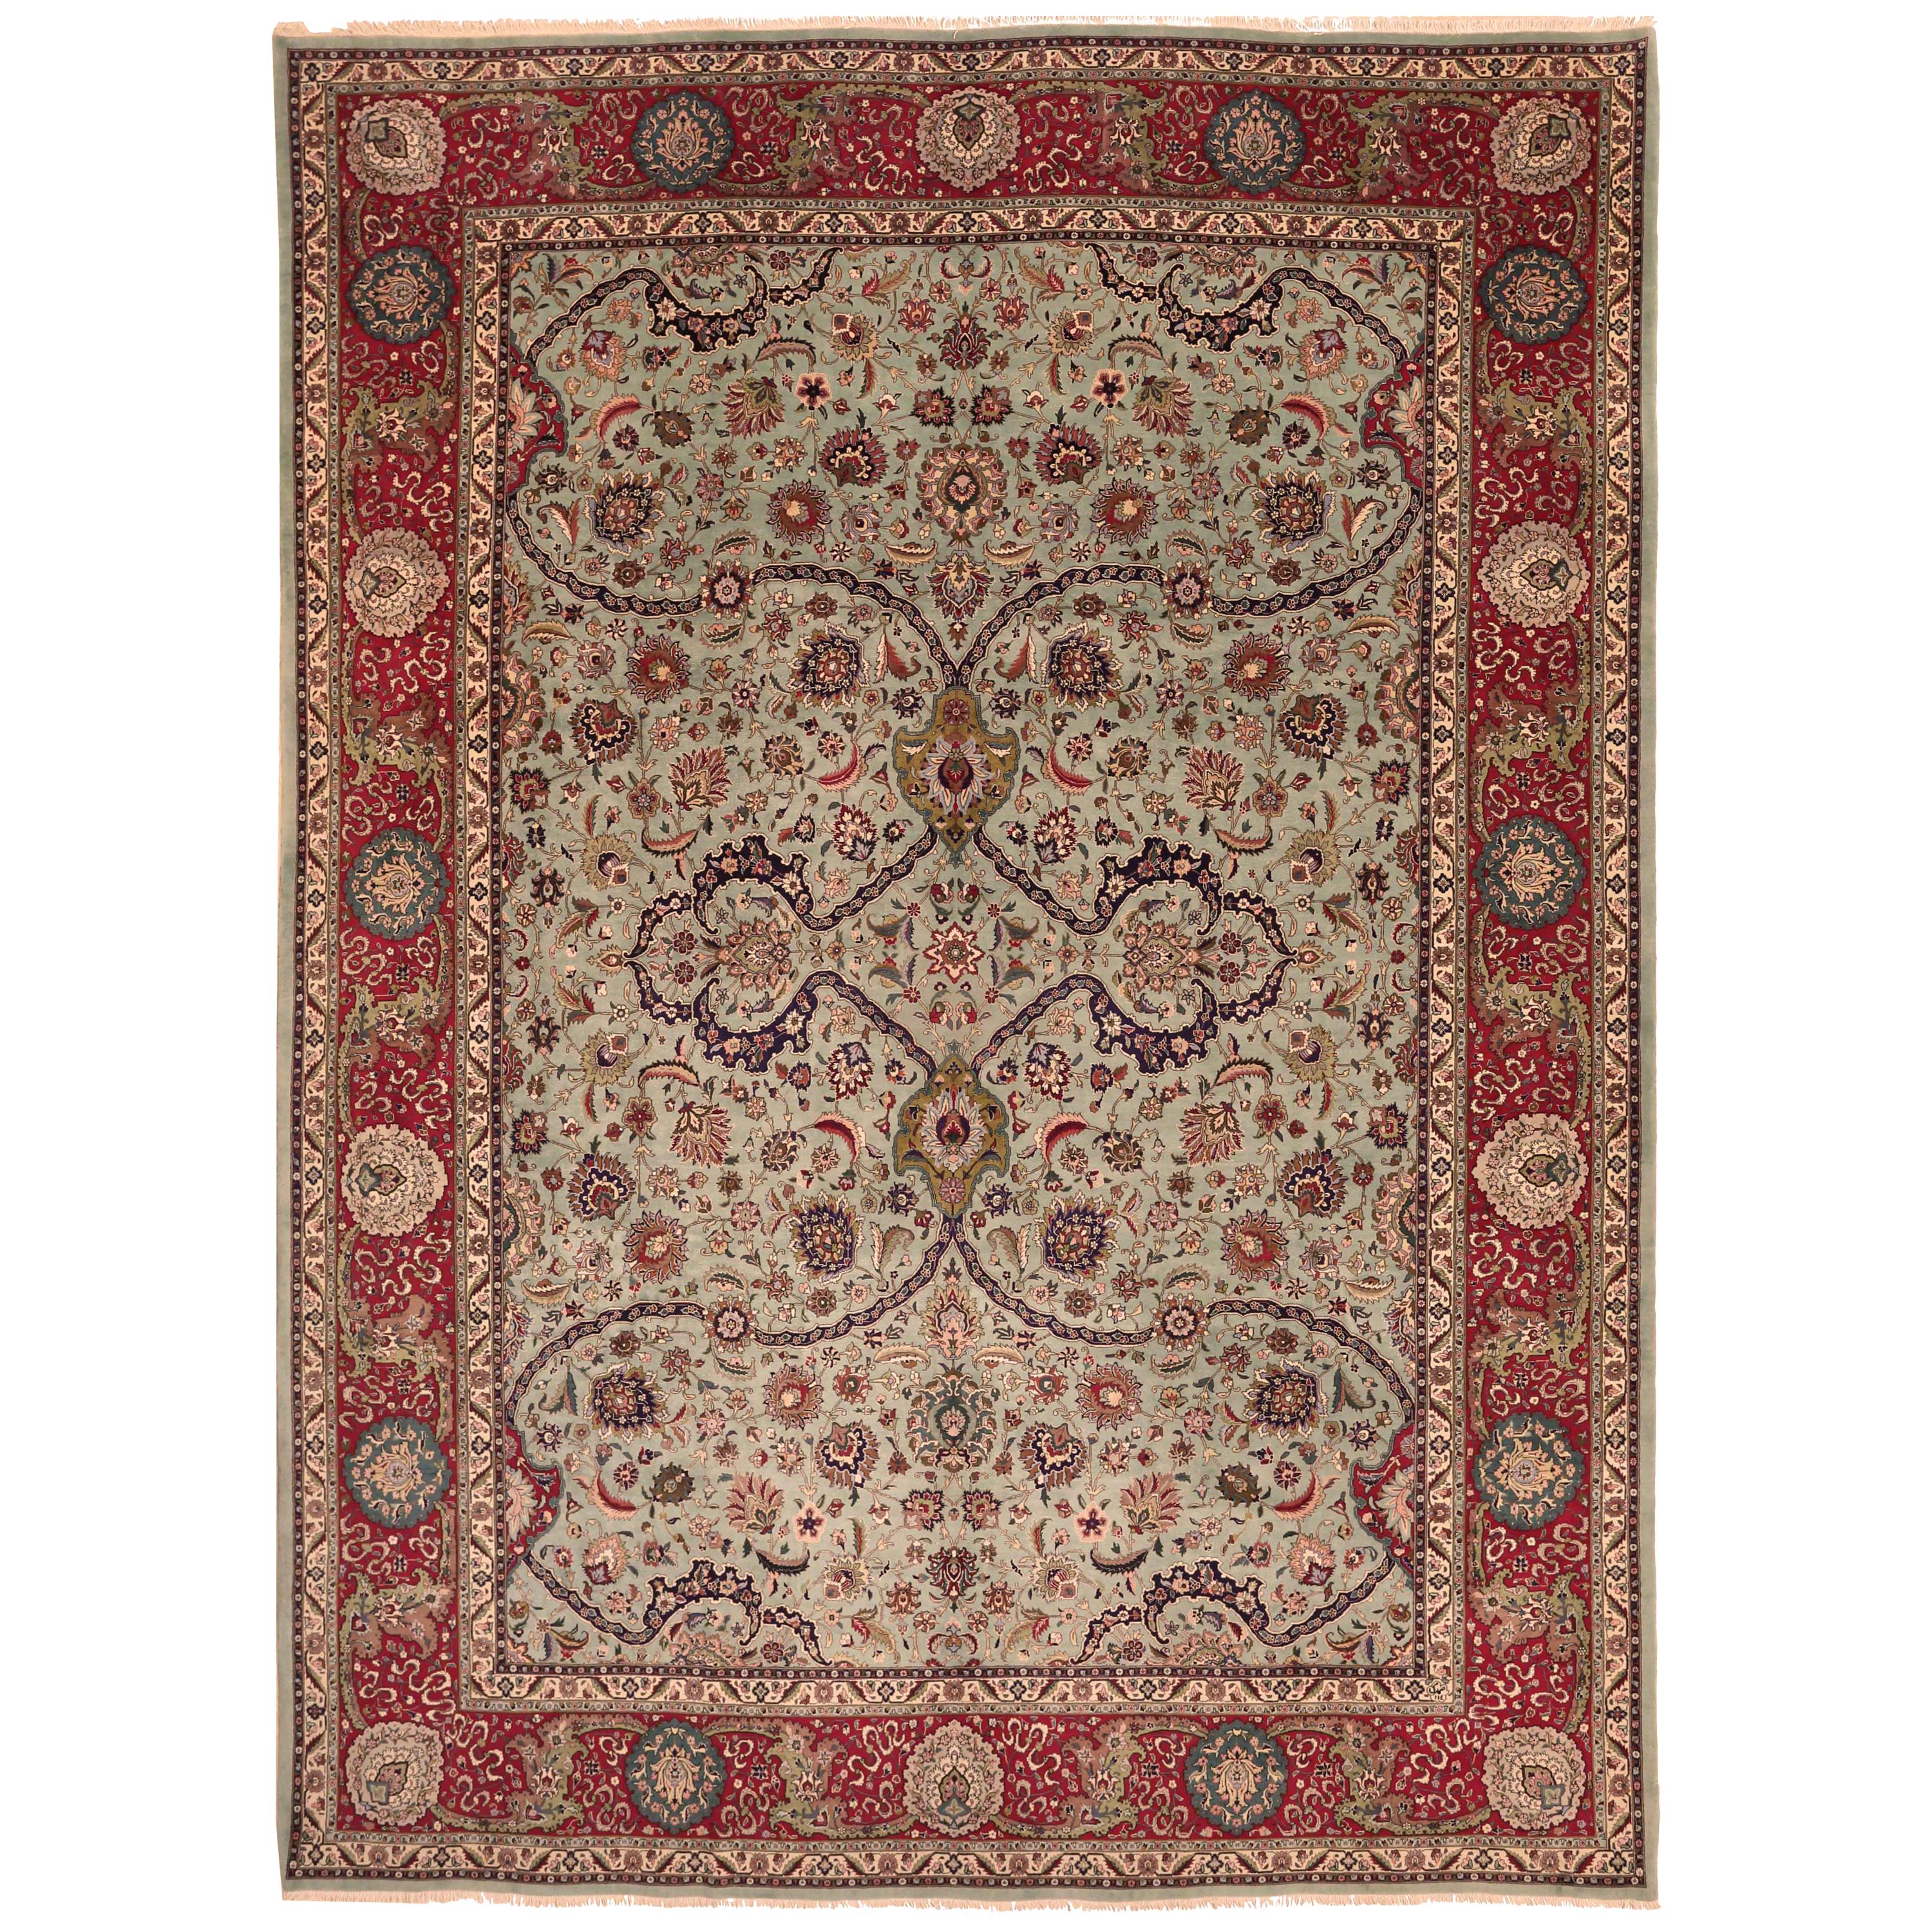 1970s Antique Tabriz Persian Rug with a Grand Blue and Red Floral Design For Sale